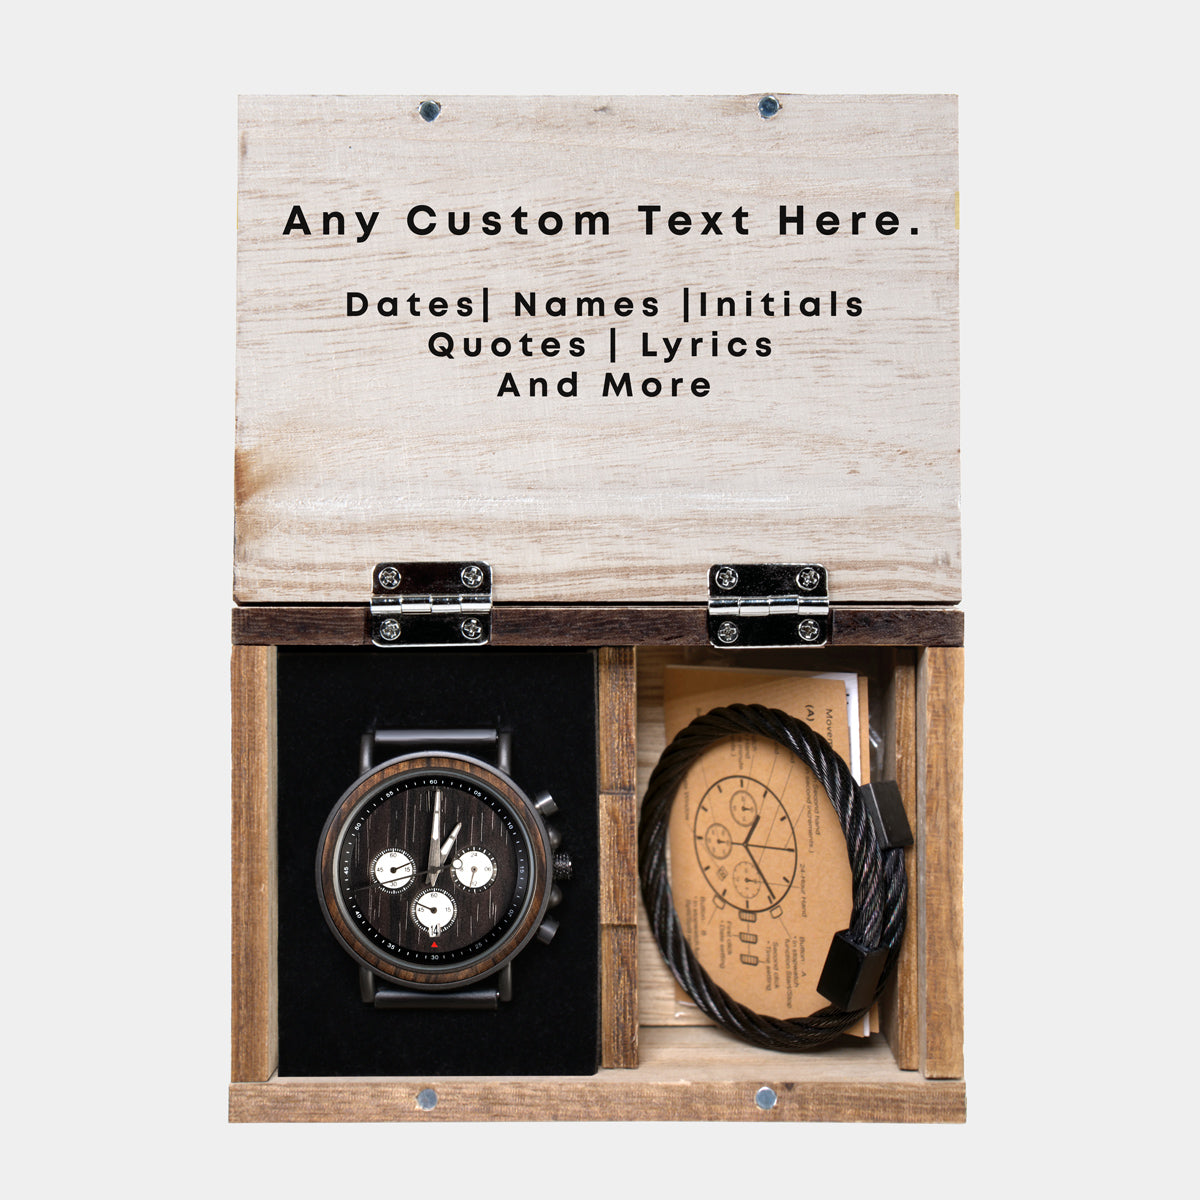 Los Angeles Chargers Wooden Wristwatch - Chronograph Black Walnut Watch